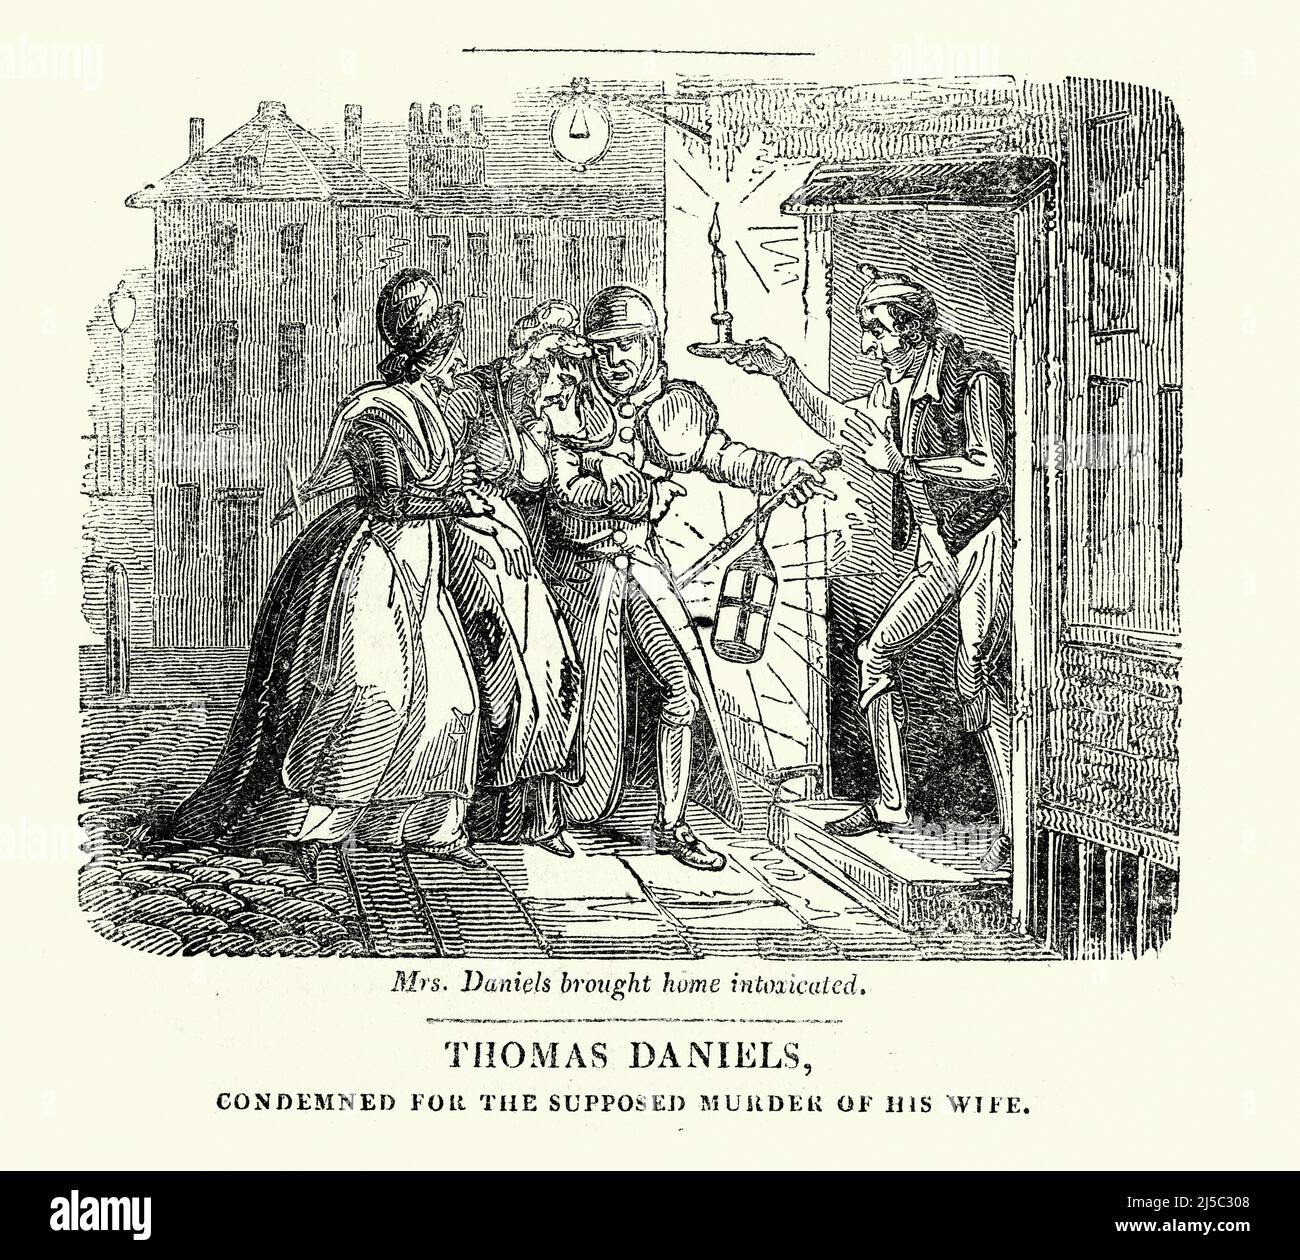 Vintage illustration, Scene from The Newgate Calendar, Thomas Daniels, Condemned for the supposed Murder of his wife but subsequently pardoned, 1761. Stock Photo